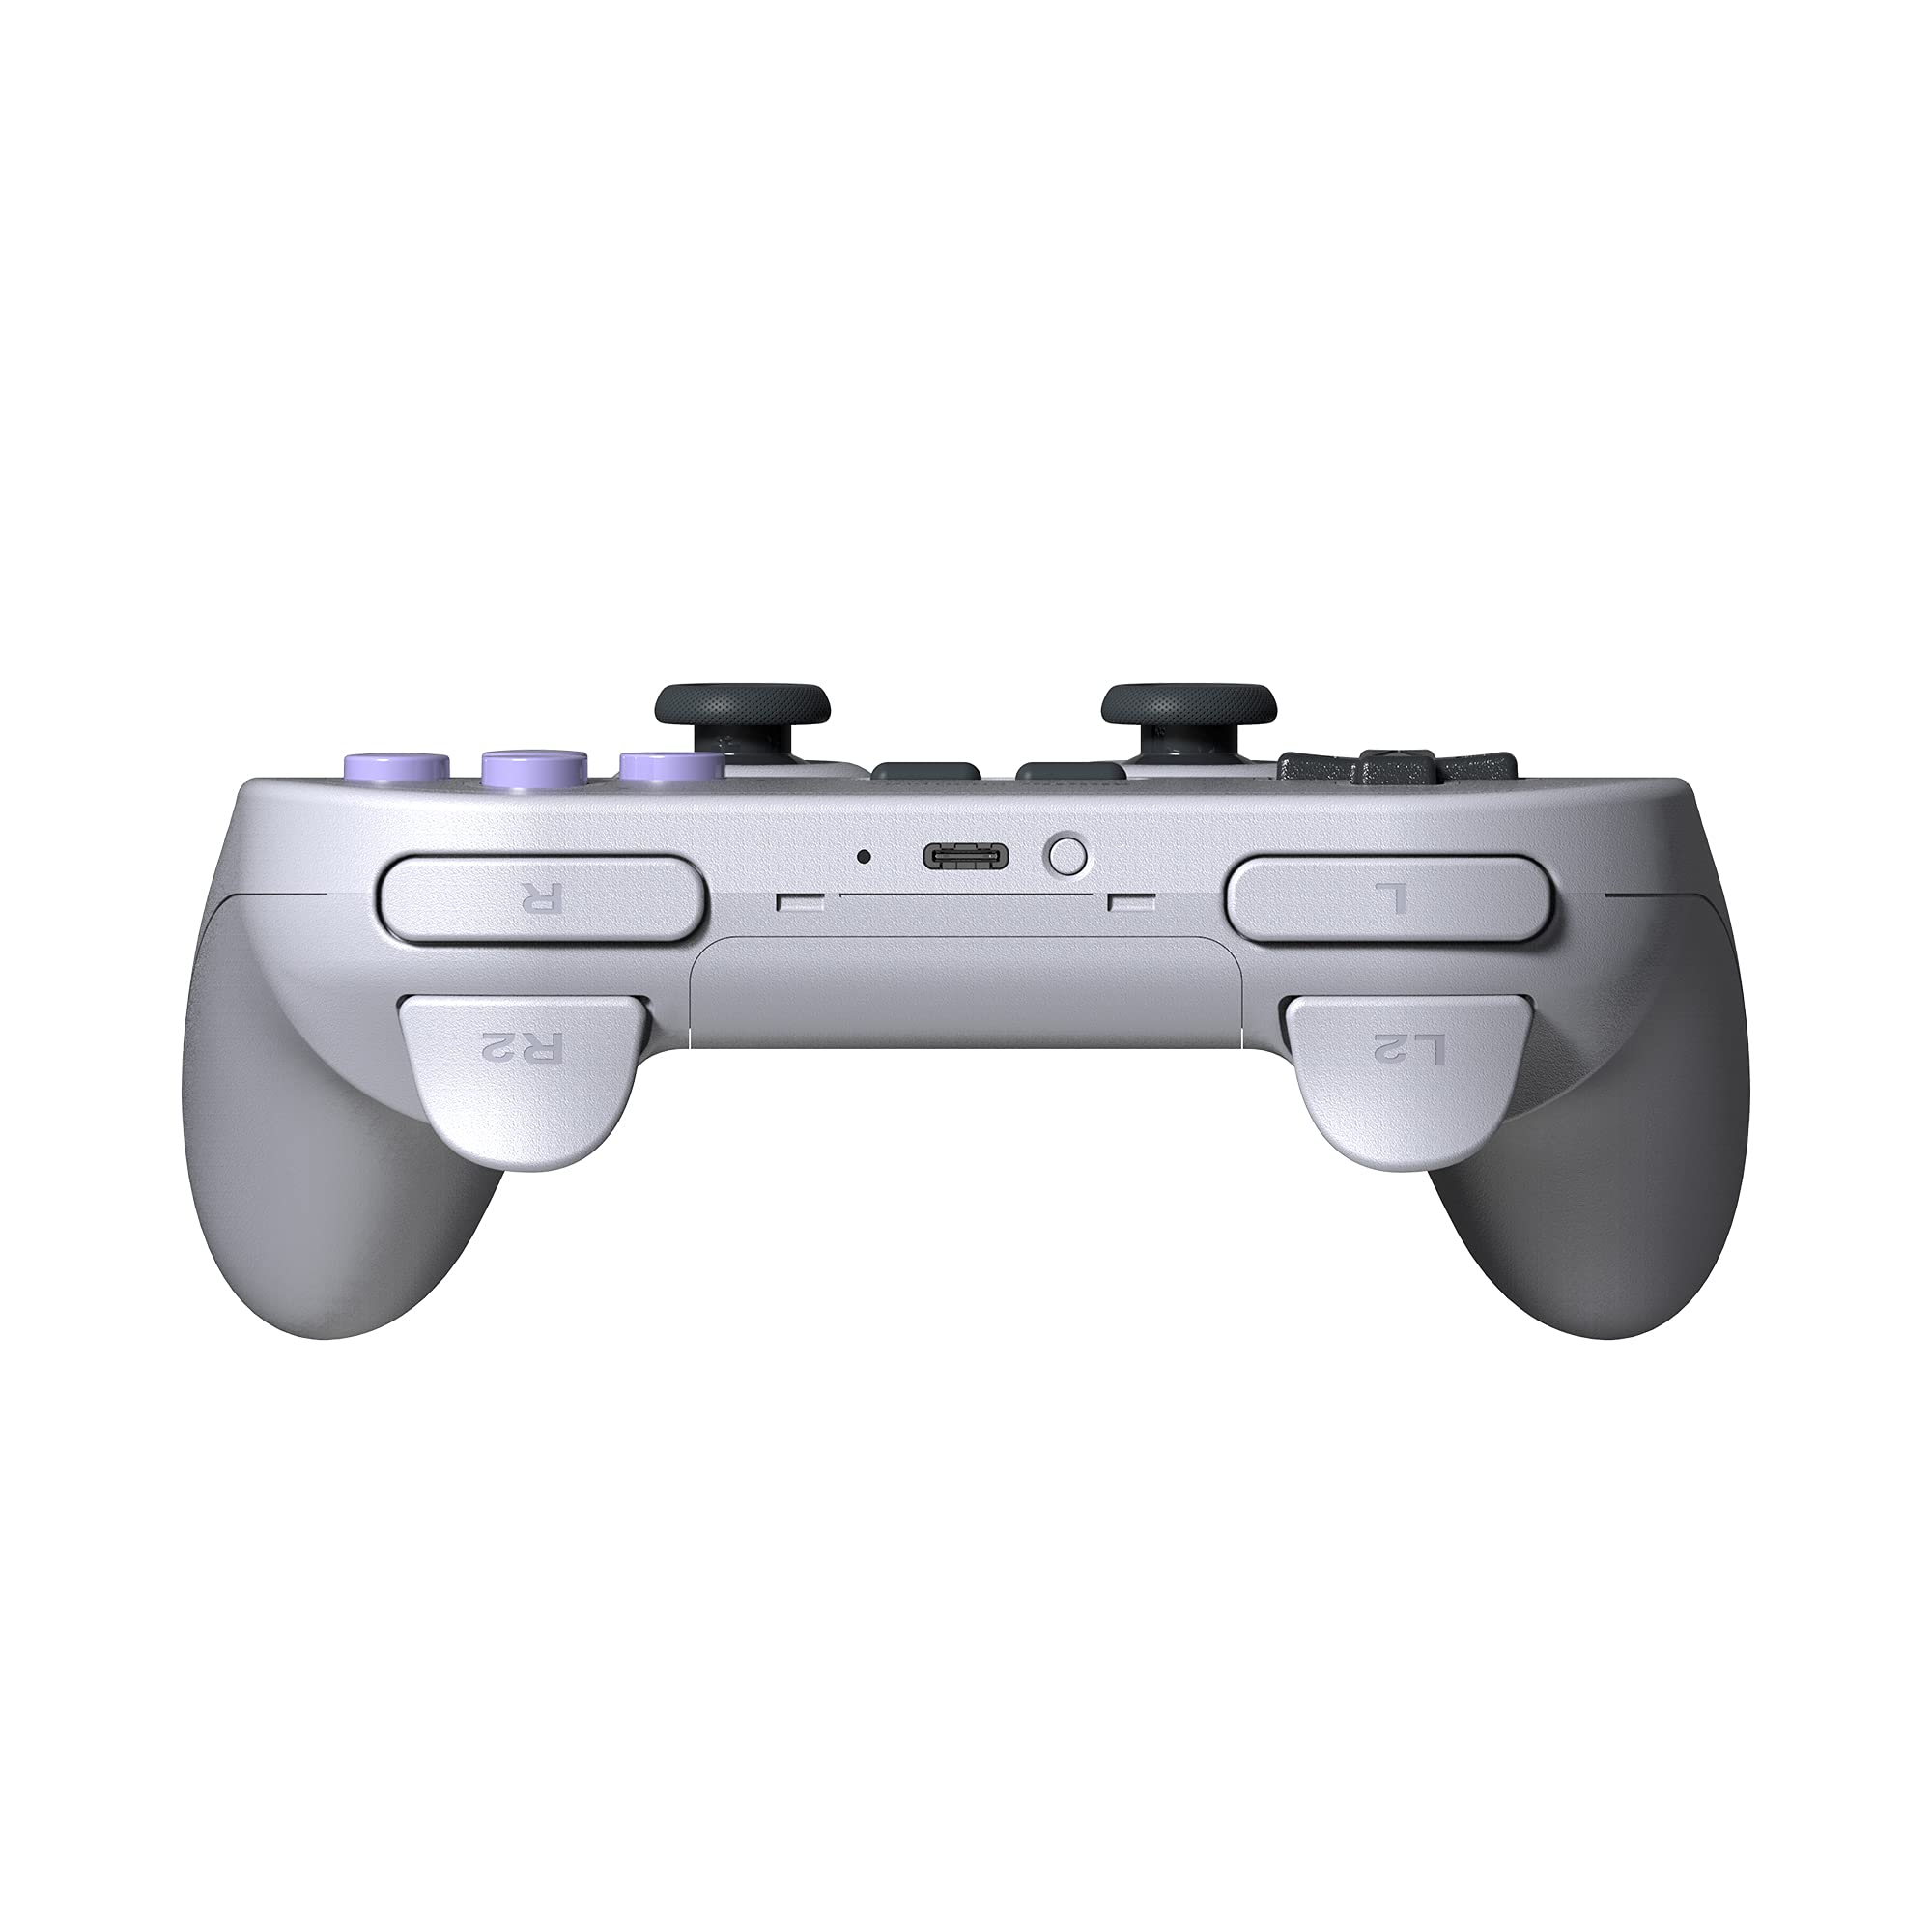 8Bitdo Sn30 Pro+ Bluetooth Controller Wireless Gamepad for Switch, PC, macOS, Android, Steam and Raspberry Pi (SN Edition)